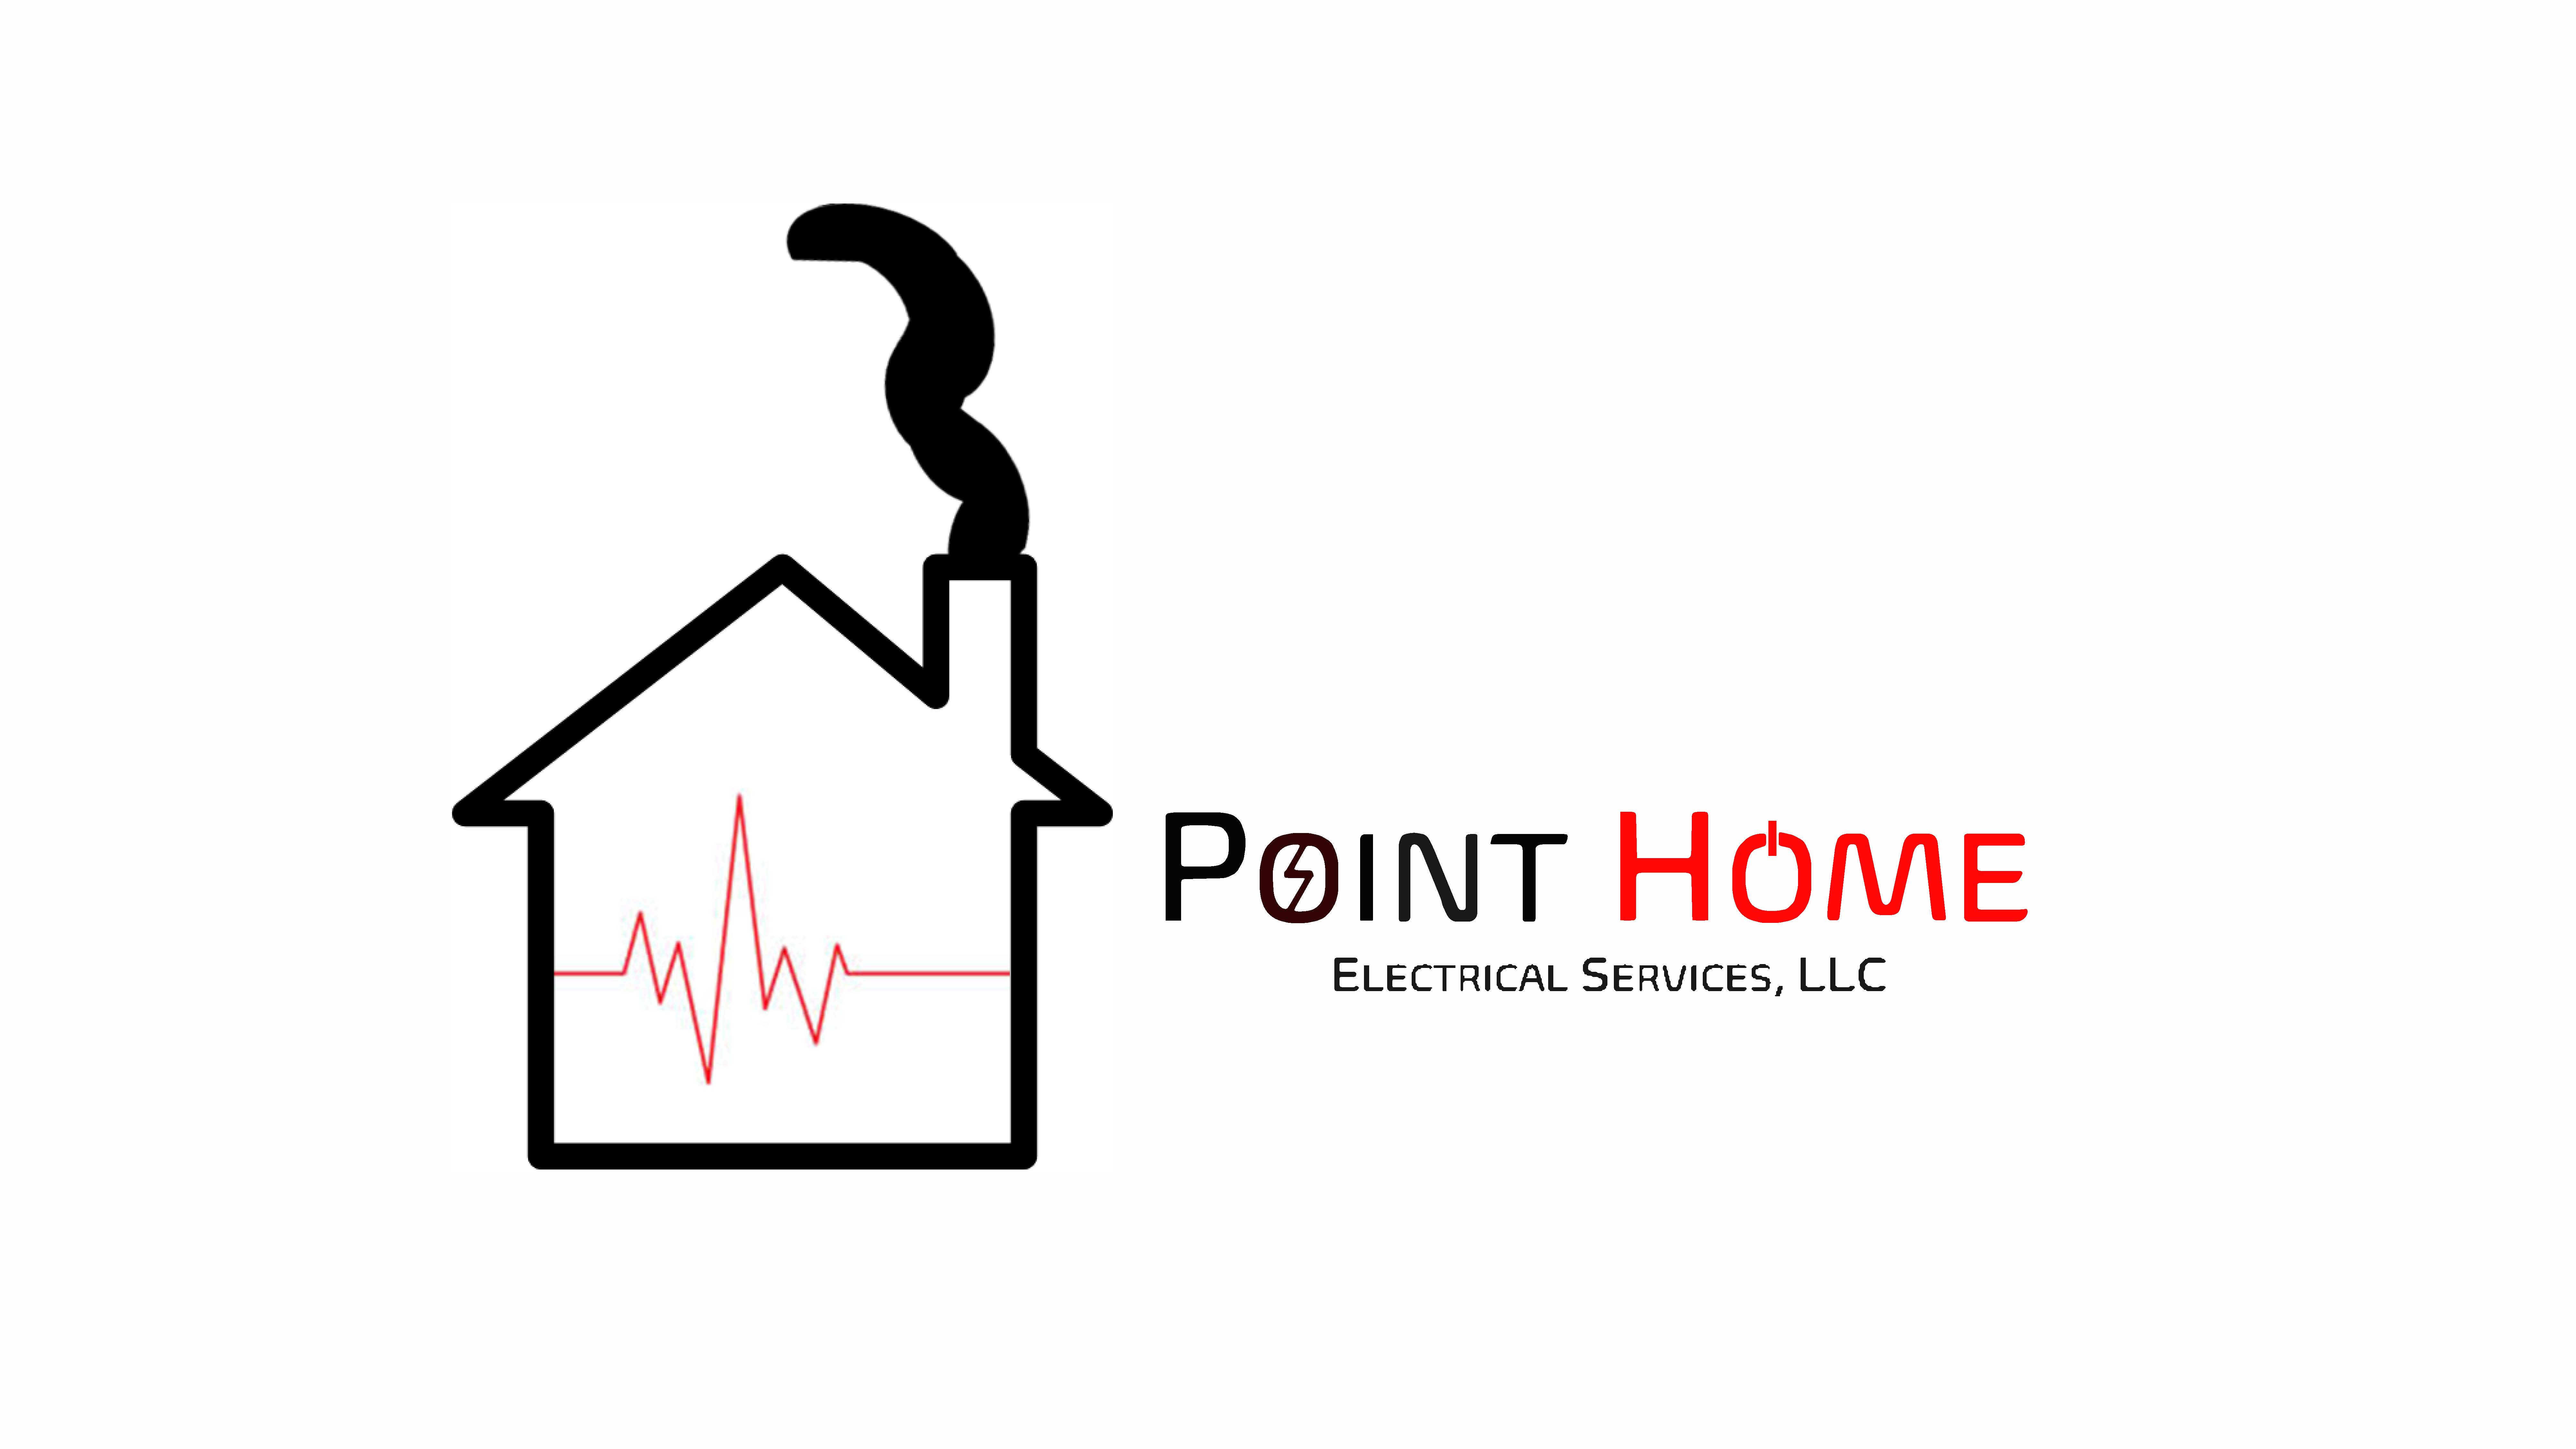 Point Home Electrical Service Logo